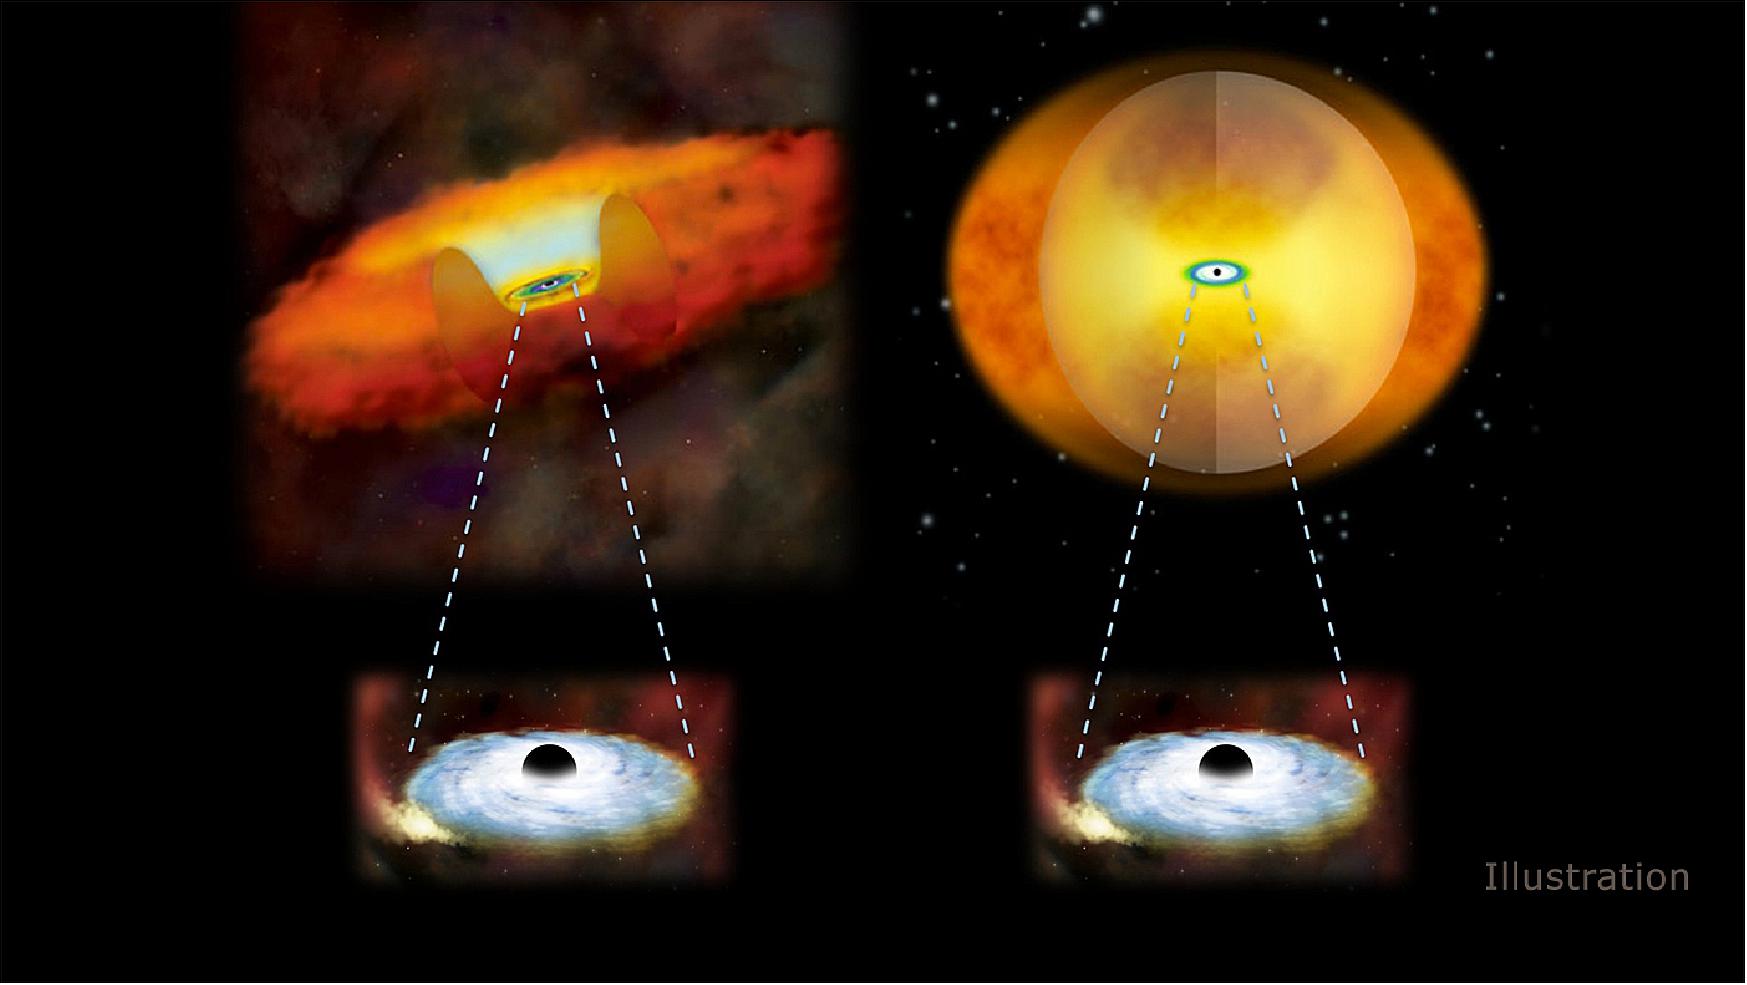 Figure 26: This illustration compares growing supermassive black holes in two different kinds of galaxies. A growing supermassive black hole in a normal galaxy would have a donut-shaped structure of gas and dust around it (left). In a merging galaxy, a sphere of material obscures the black hole (right), image credit: National Astronomical Observatory of Japan